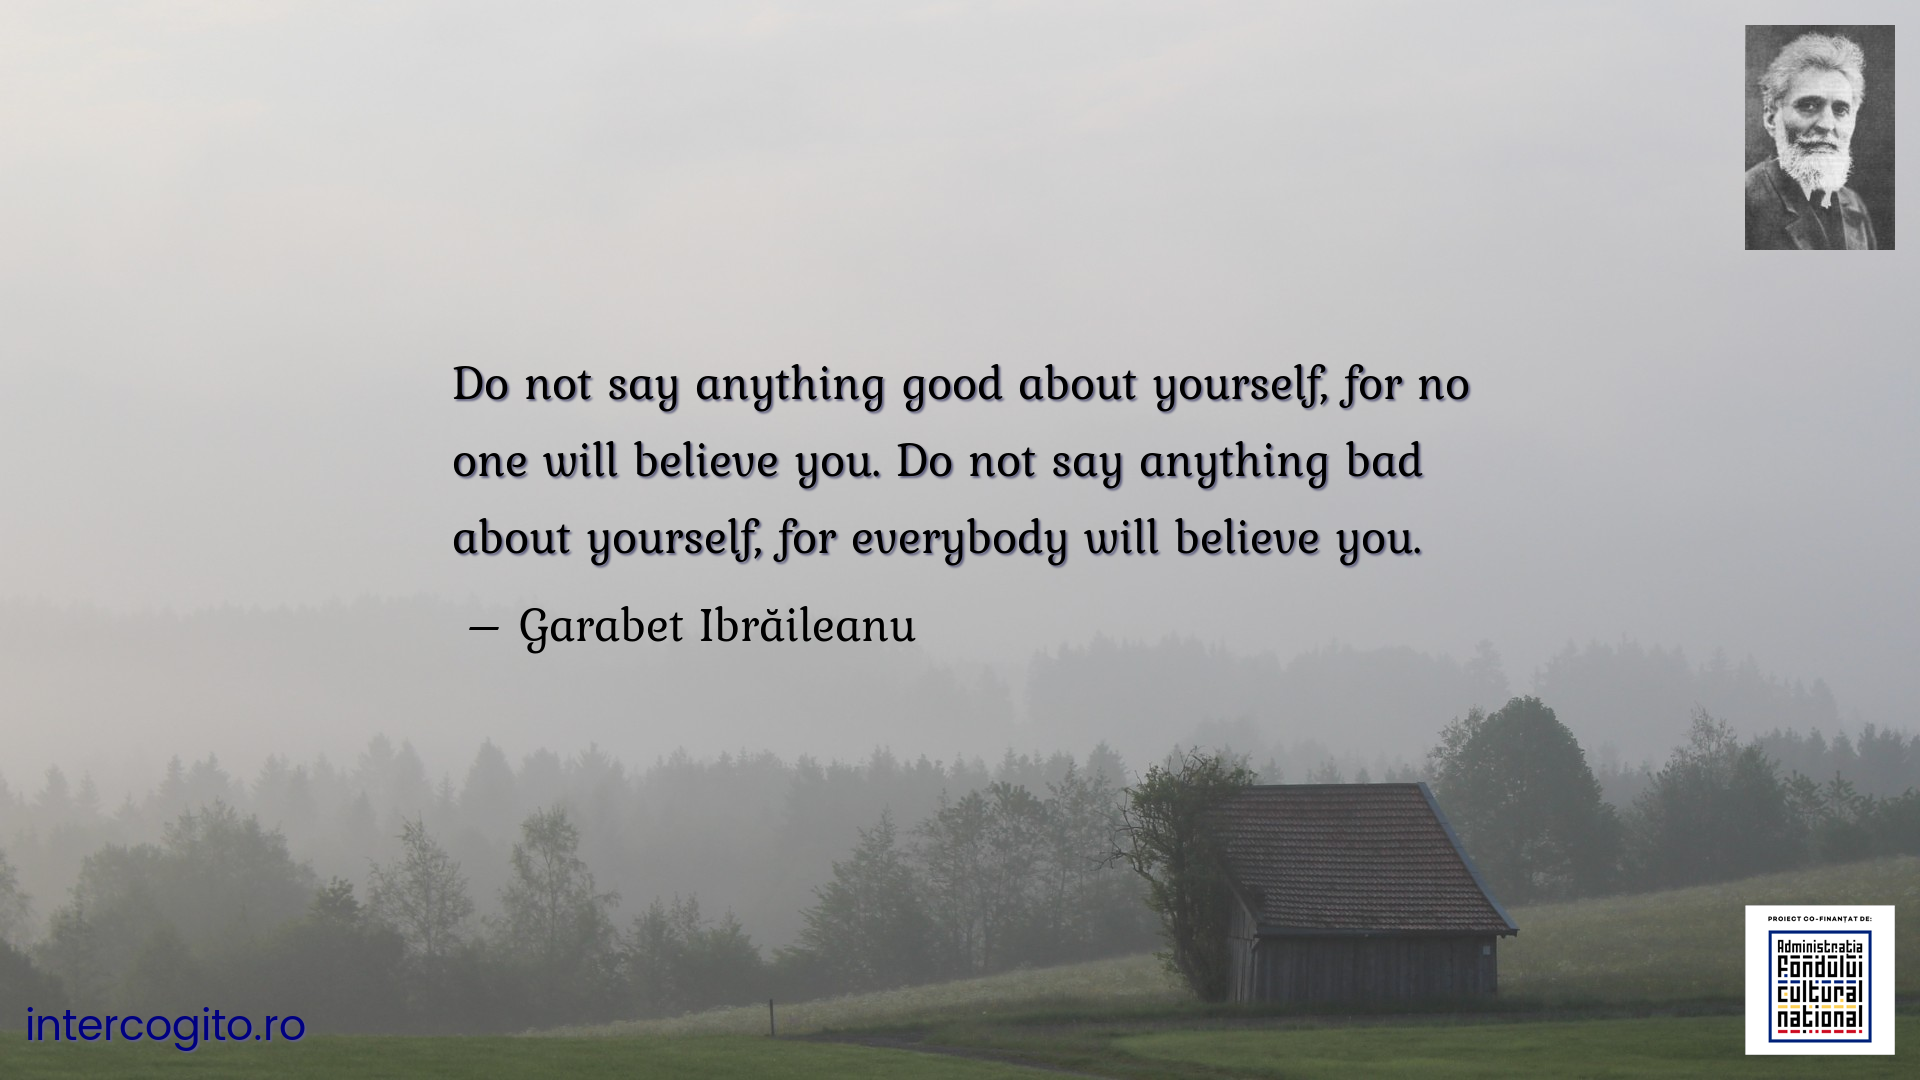 Do not say anything good about yourself, for no one will believe you. Do not say anything bad about yourself, for everybody will believe you.